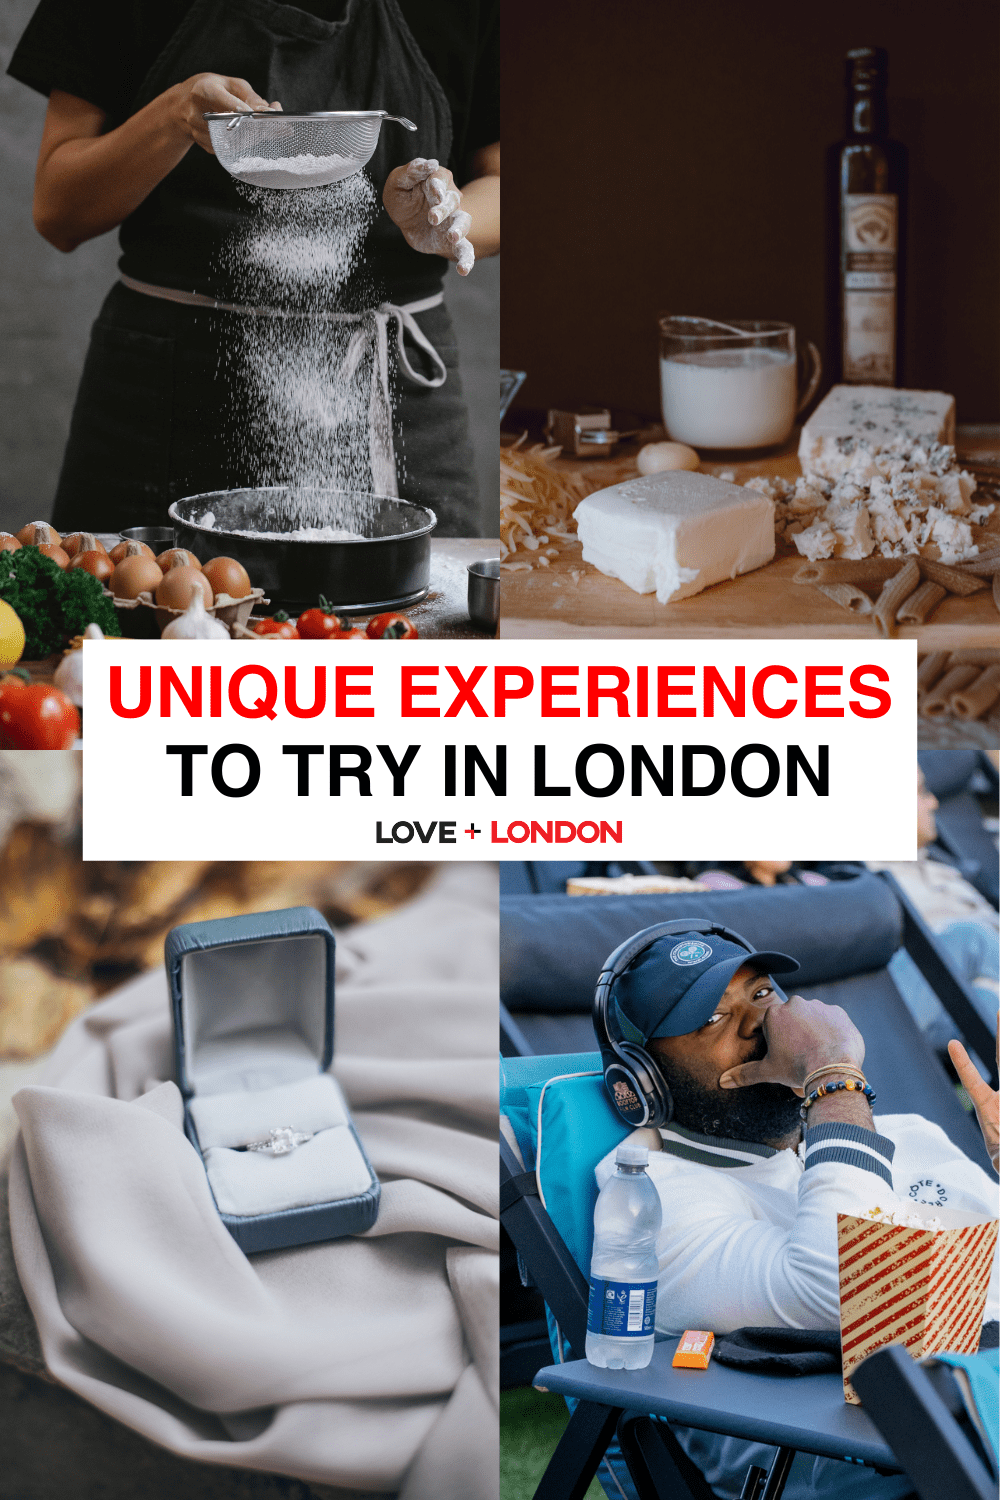 Unique Experiences to Try in London